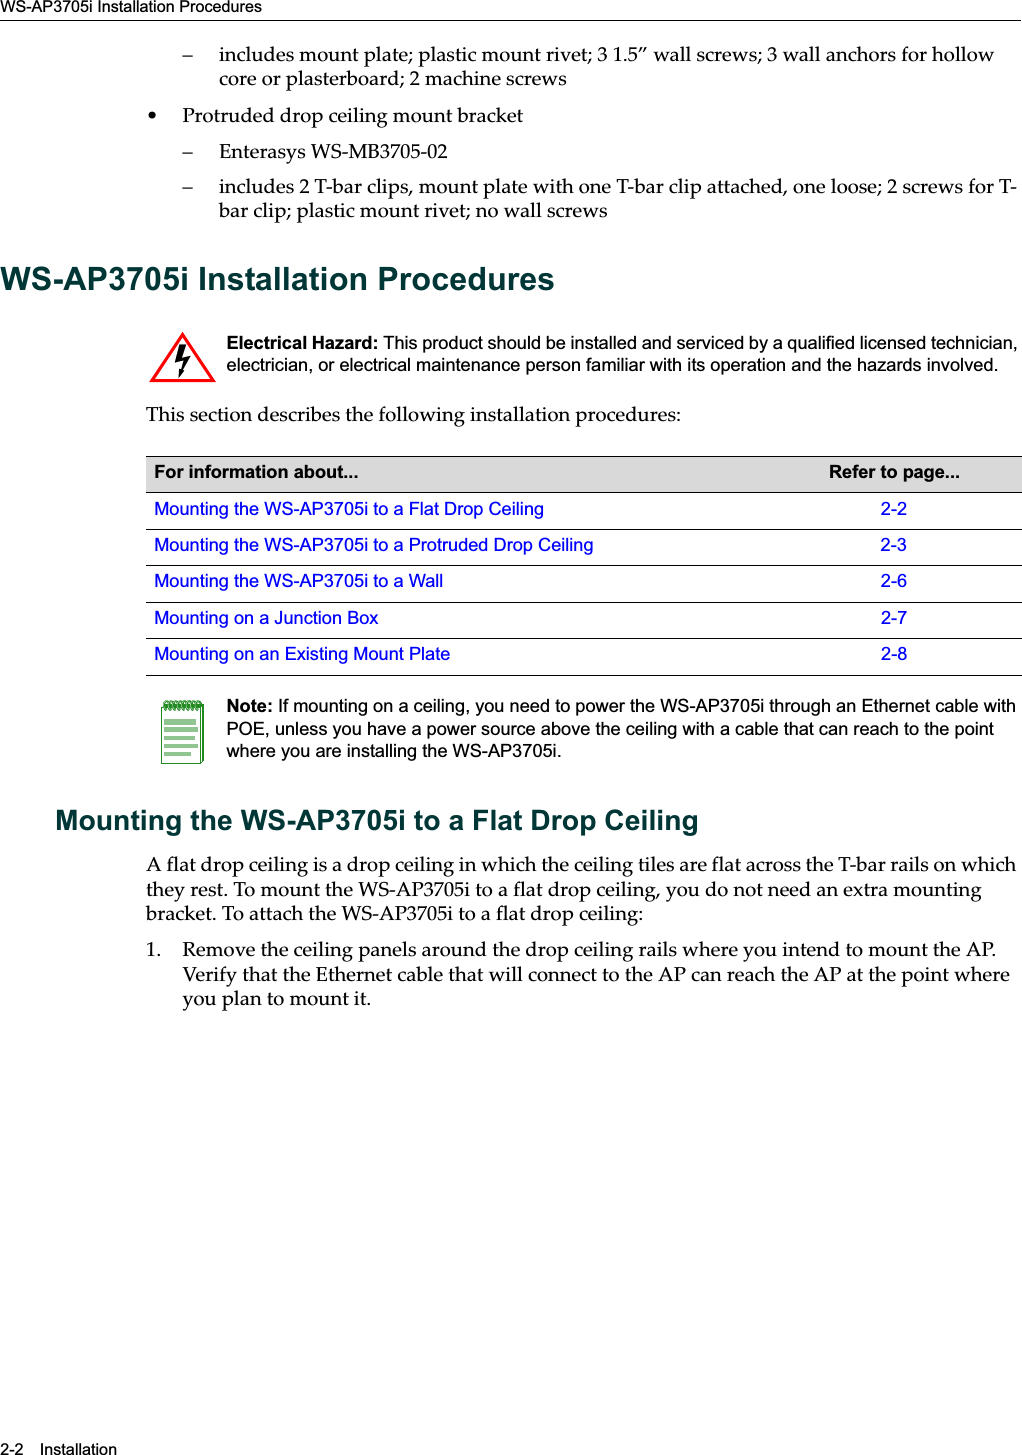 WS-AP3705i Installation Procedures2-2 Installation– includes mount plate; plastic mount rivet; 3 1.5” wall screws; 3 wall anchors for hollow core or plasterboard; 2 machine screws• Protruded drop ceiling mount bracket– Enterasys WS-MB3705-02– includes 2 T-bar clips, mount plate with one T-bar clip attached, one loose; 2 screws for T-bar clip; plastic mount rivet; no wall screwsWS-AP3705i Installation ProceduresThis section describes the following installation procedures:Mounting the WS-AP3705i to a Flat Drop CeilingA flat drop ceiling is a drop ceiling in which the ceiling tiles are flat across the T-bar rails on which they rest. To mount the WS-AP3705i to a flat drop ceiling, you do not need an extra mounting bracket. To attach the WS-AP3705i to a flat drop ceiling:1. Remove the ceiling panels around the drop ceiling rails where you intend to mount the AP. Verify that the Ethernet cable that will connect to the AP can reach the AP at the point where you plan to mount it.Electrical Hazard: This product should be installed and serviced by a qualified licensed technician, electrician, or electrical maintenance person familiar with its operation and the hazards involved. For information about... Refer to page...Mounting the WS-AP3705i to a Flat Drop Ceiling 2-2Mounting the WS-AP3705i to a Protruded Drop Ceiling 2-3Mounting the WS-AP3705i to a Wall 2-6Mounting on a Junction Box 2-7Mounting on an Existing Mount Plate 2-8Note: If mounting on a ceiling, you need to power the WS-AP3705i through an Ethernet cable with POE, unless you have a power source above the ceiling with a cable that can reach to the point where you are installing the WS-AP3705i.Draft